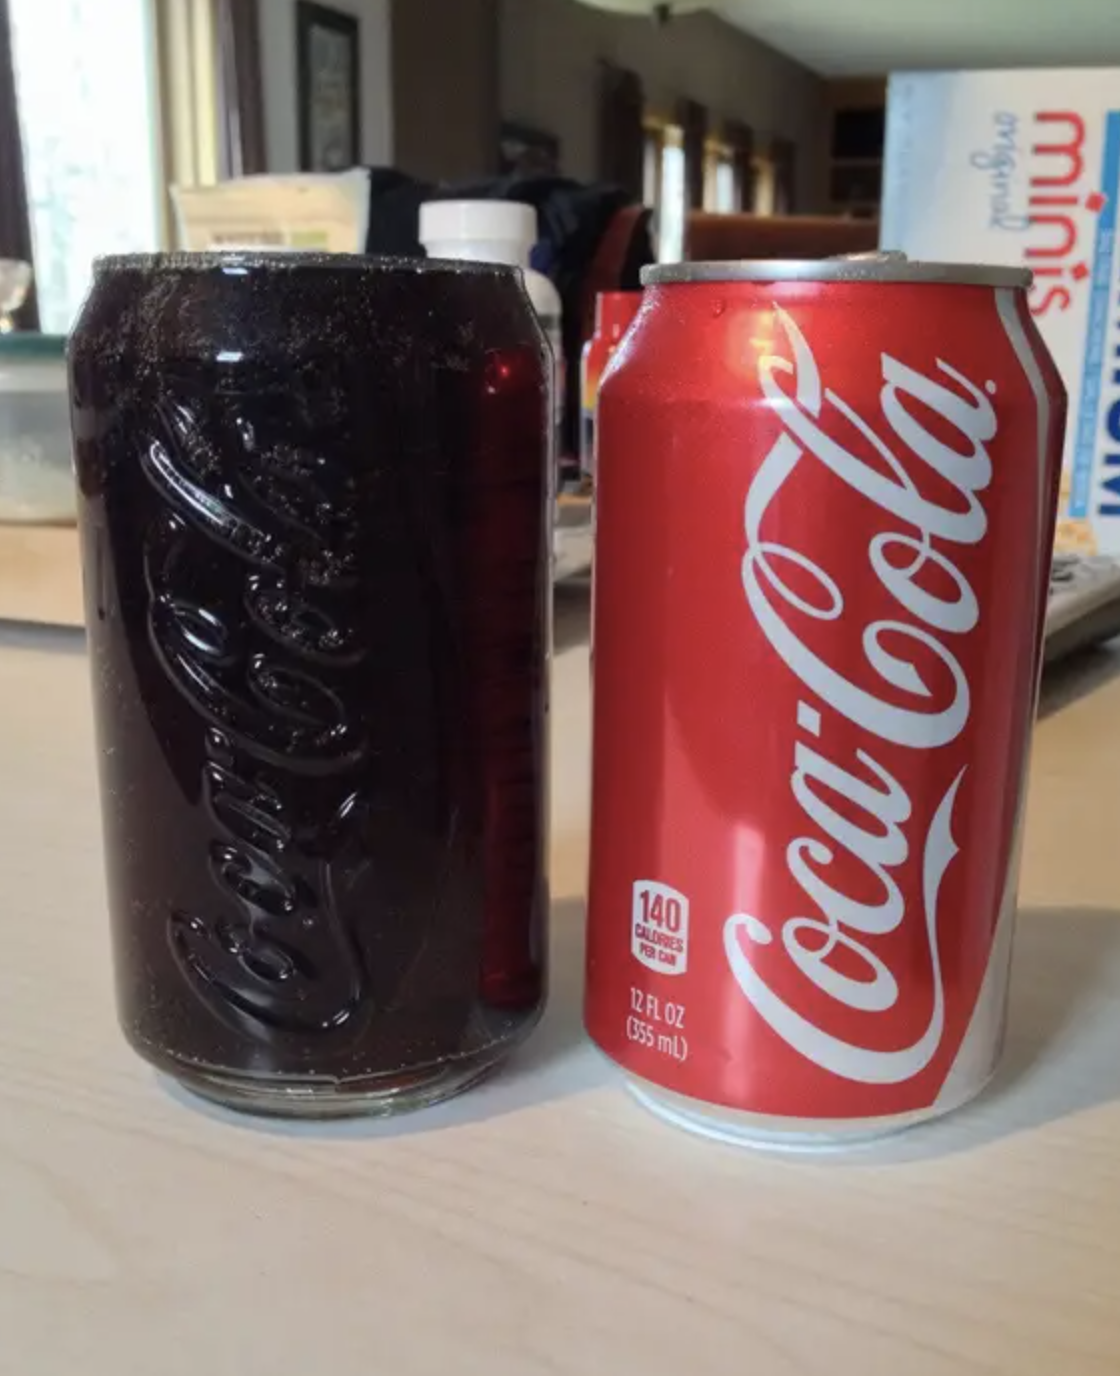 A Coke can beside a clear glass with a dark fizzy beverage, possibly Coke, with no individuals in the image